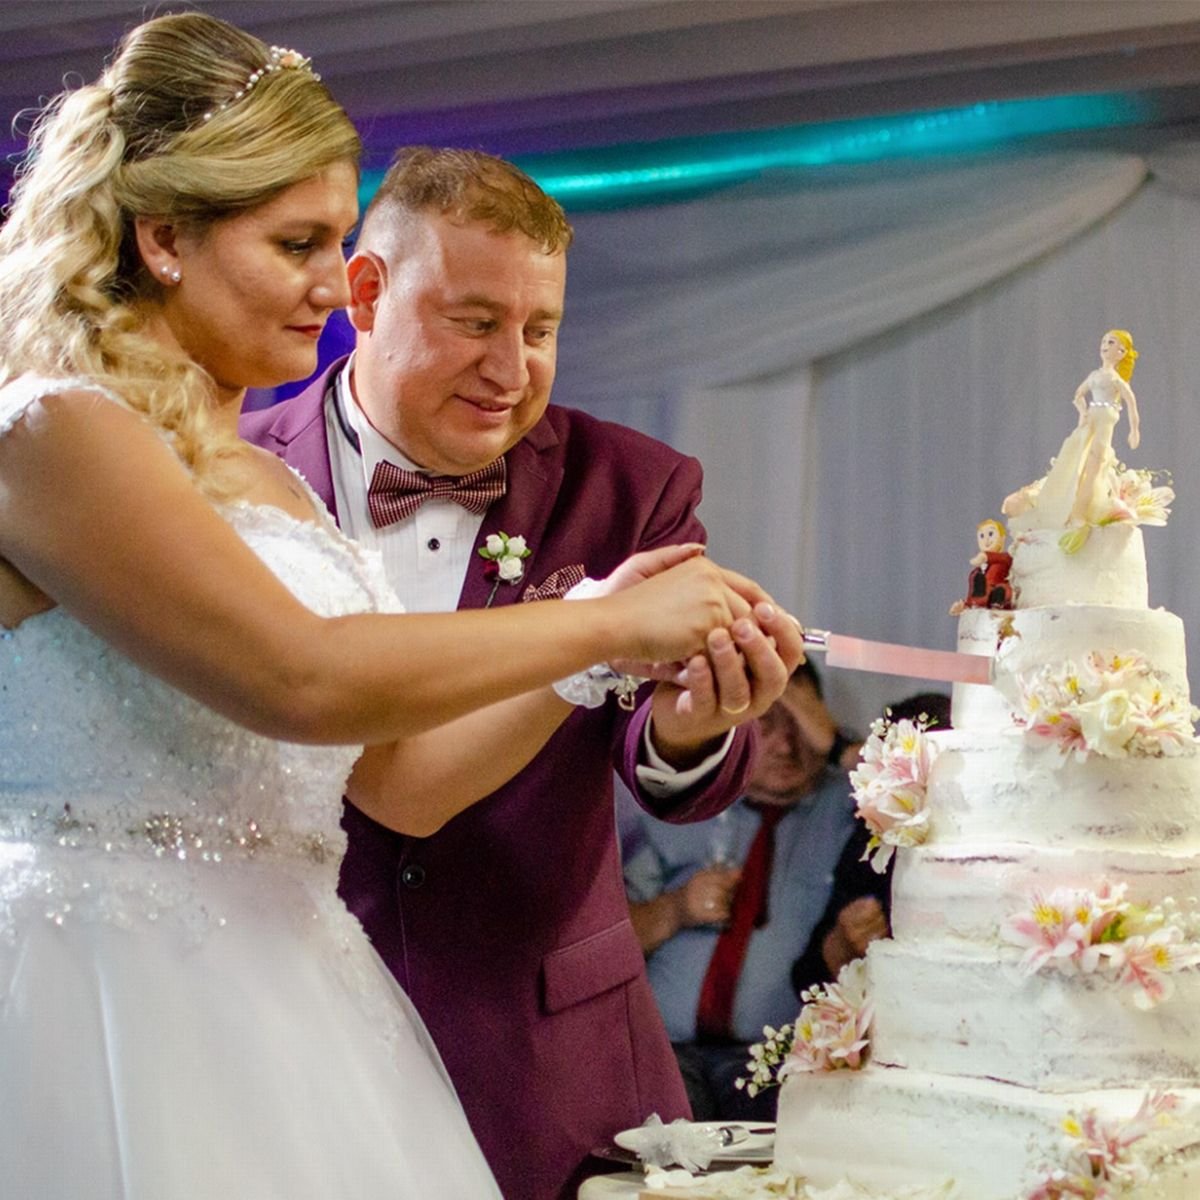 Surprising event in Chile: He fed the drugs he put on the wedding cake to the guests #1